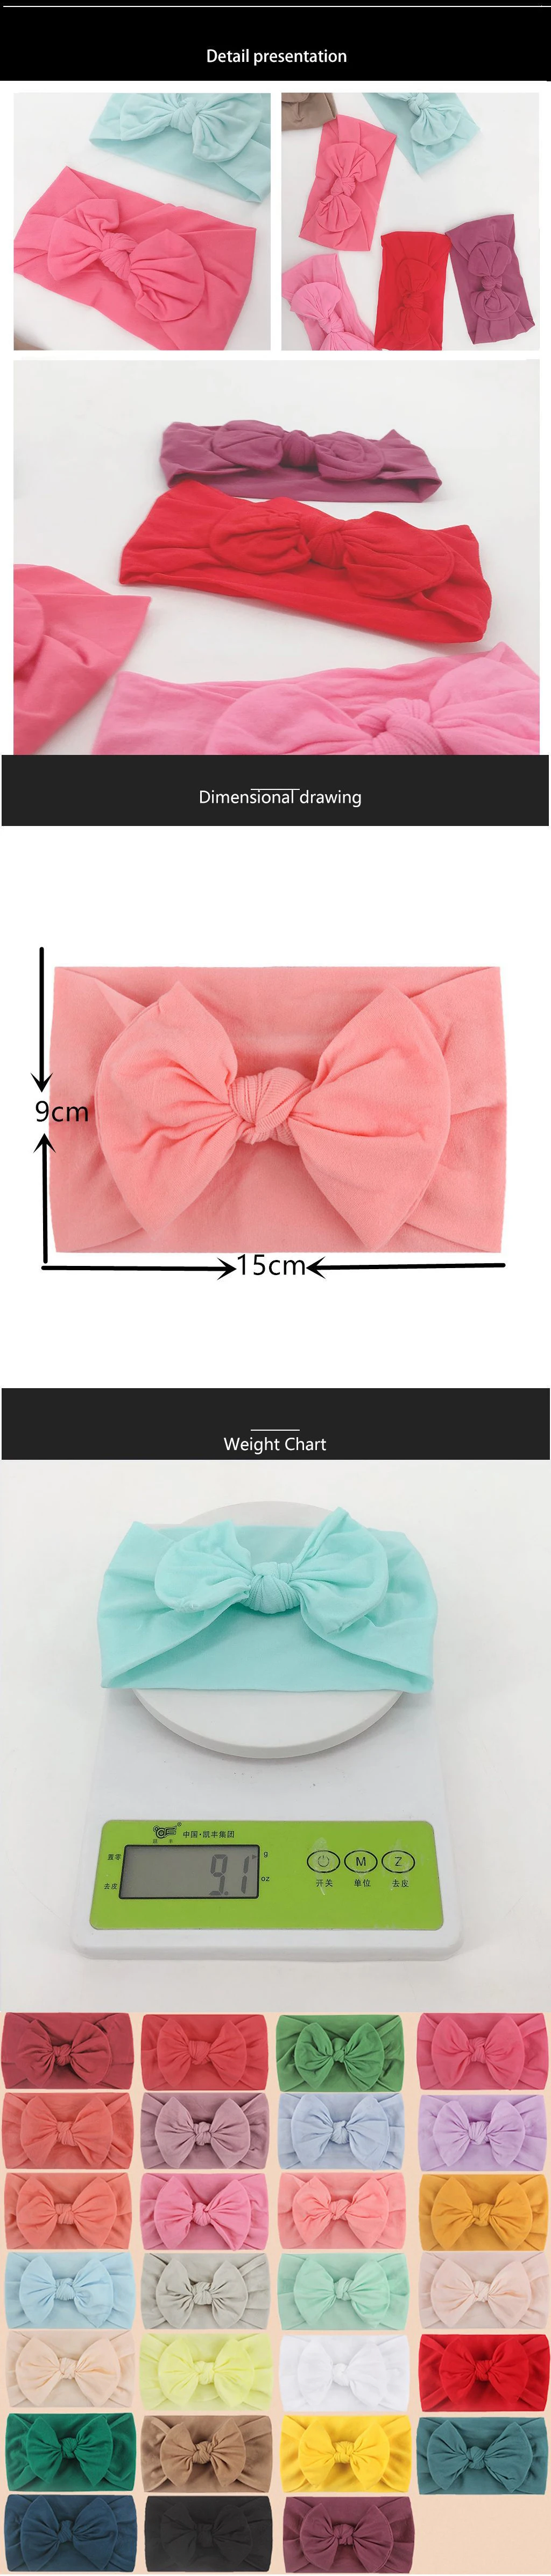 teething toys for babies 27 Colors New Fashion Baby Headband Bowknot Headwear Elastic Softs Cute Gifts Princess Hairband Baby Accessories 0-3 Years baby headband